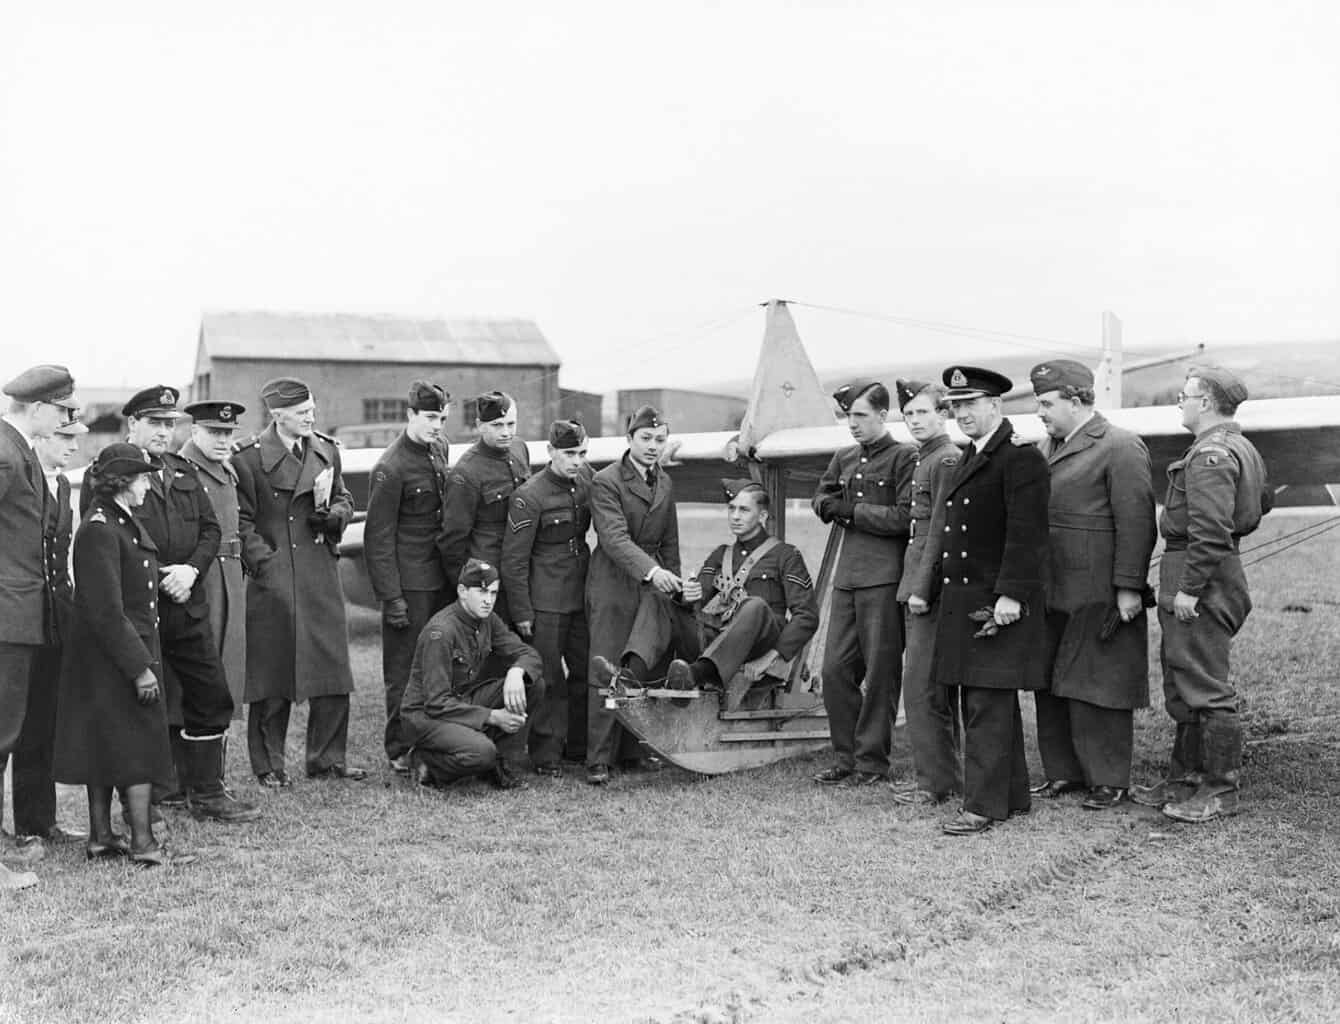 Air_cadets_learn_the_basics_of_flight_at_RNAS_St_Merryn_in_Cornwall,_February_1944._A22064